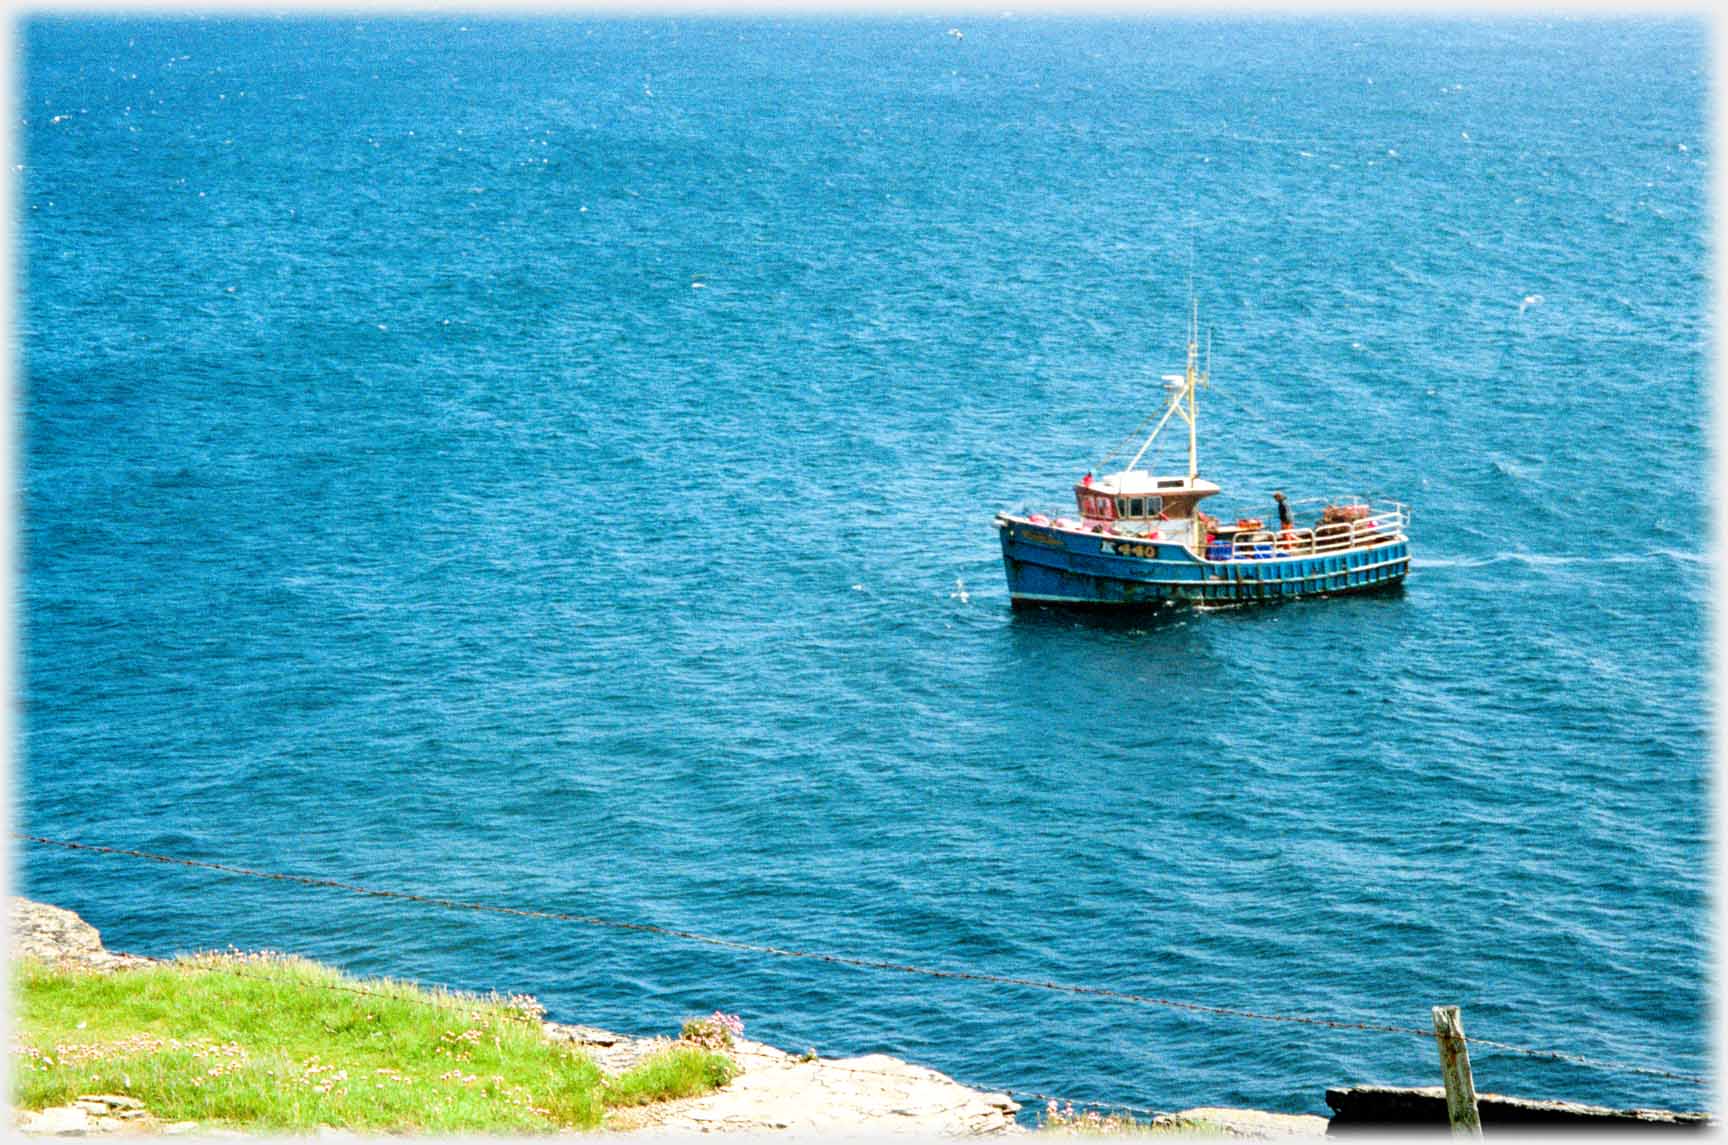 Small fishing boat in sea just off cliffs.